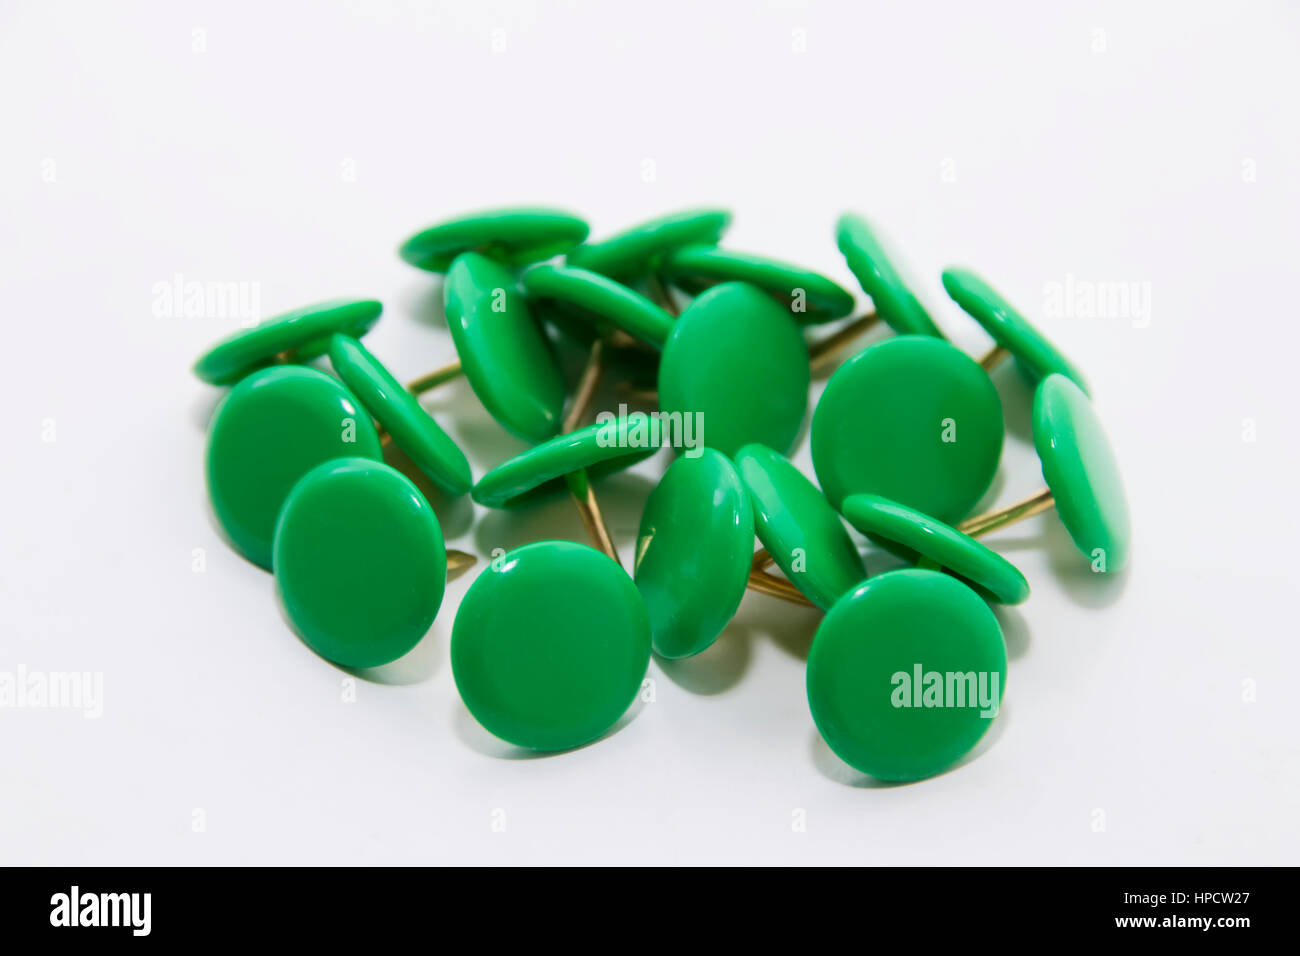 Green push pins on a white background Stock Photo